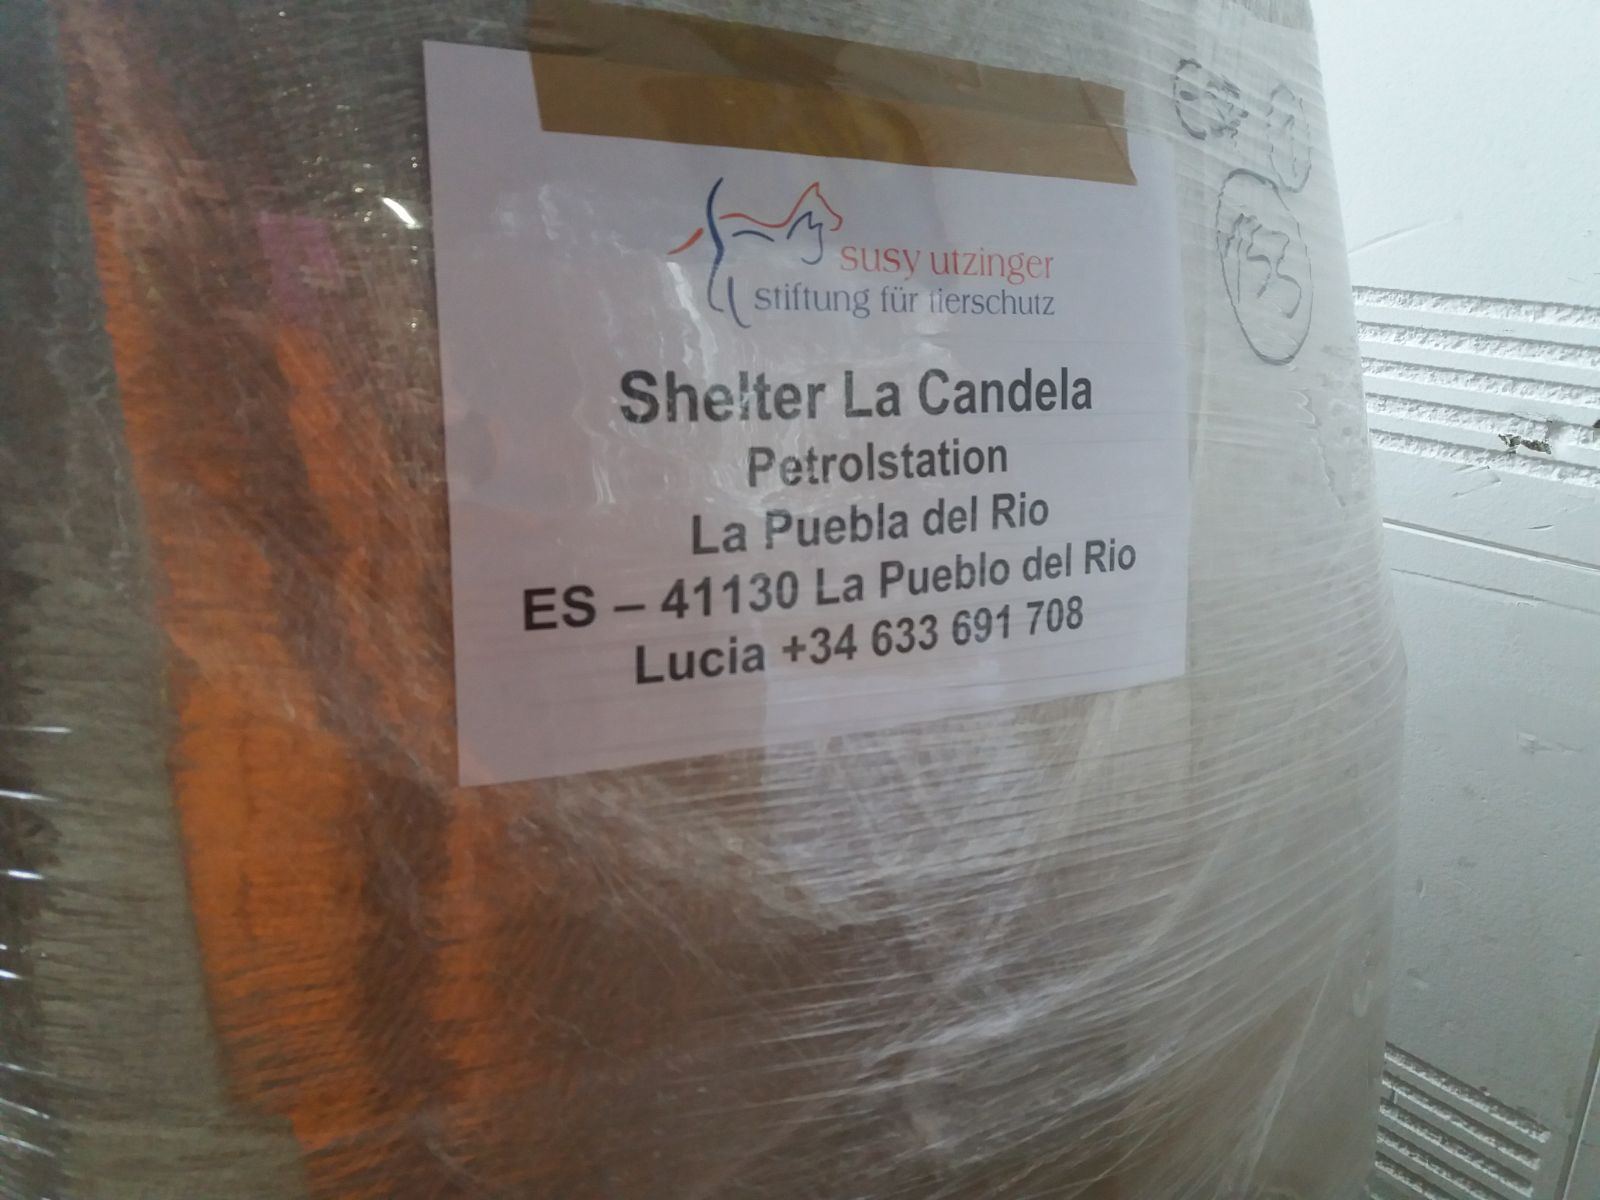 Material deliveries for shelters in need